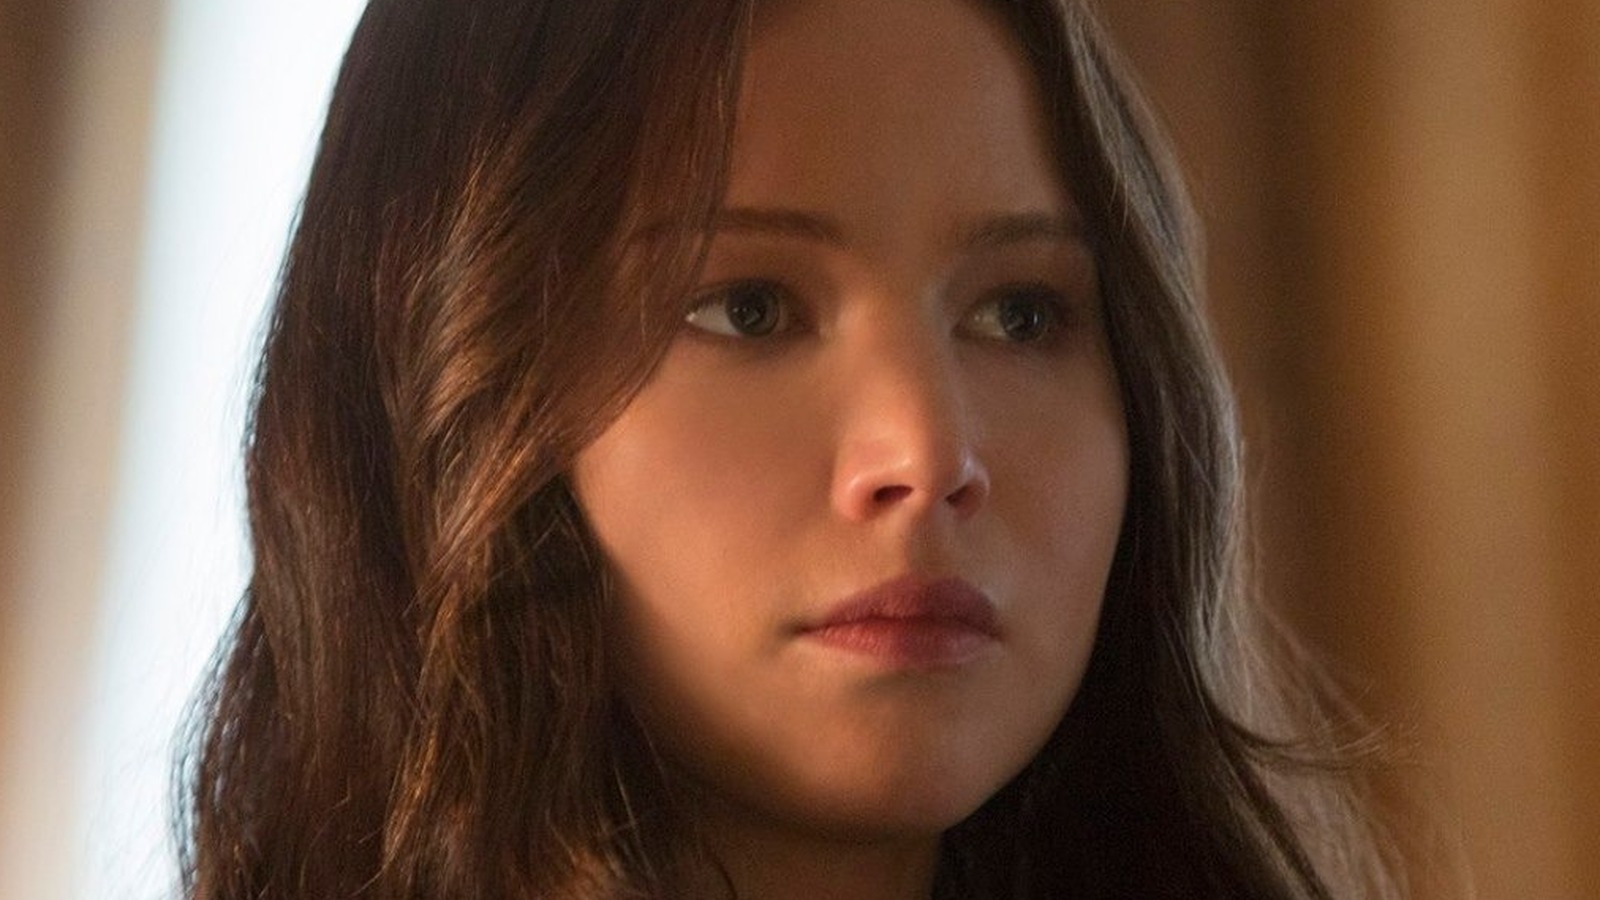 Everything We Know So Far About the Explosive New 'Hunger Games